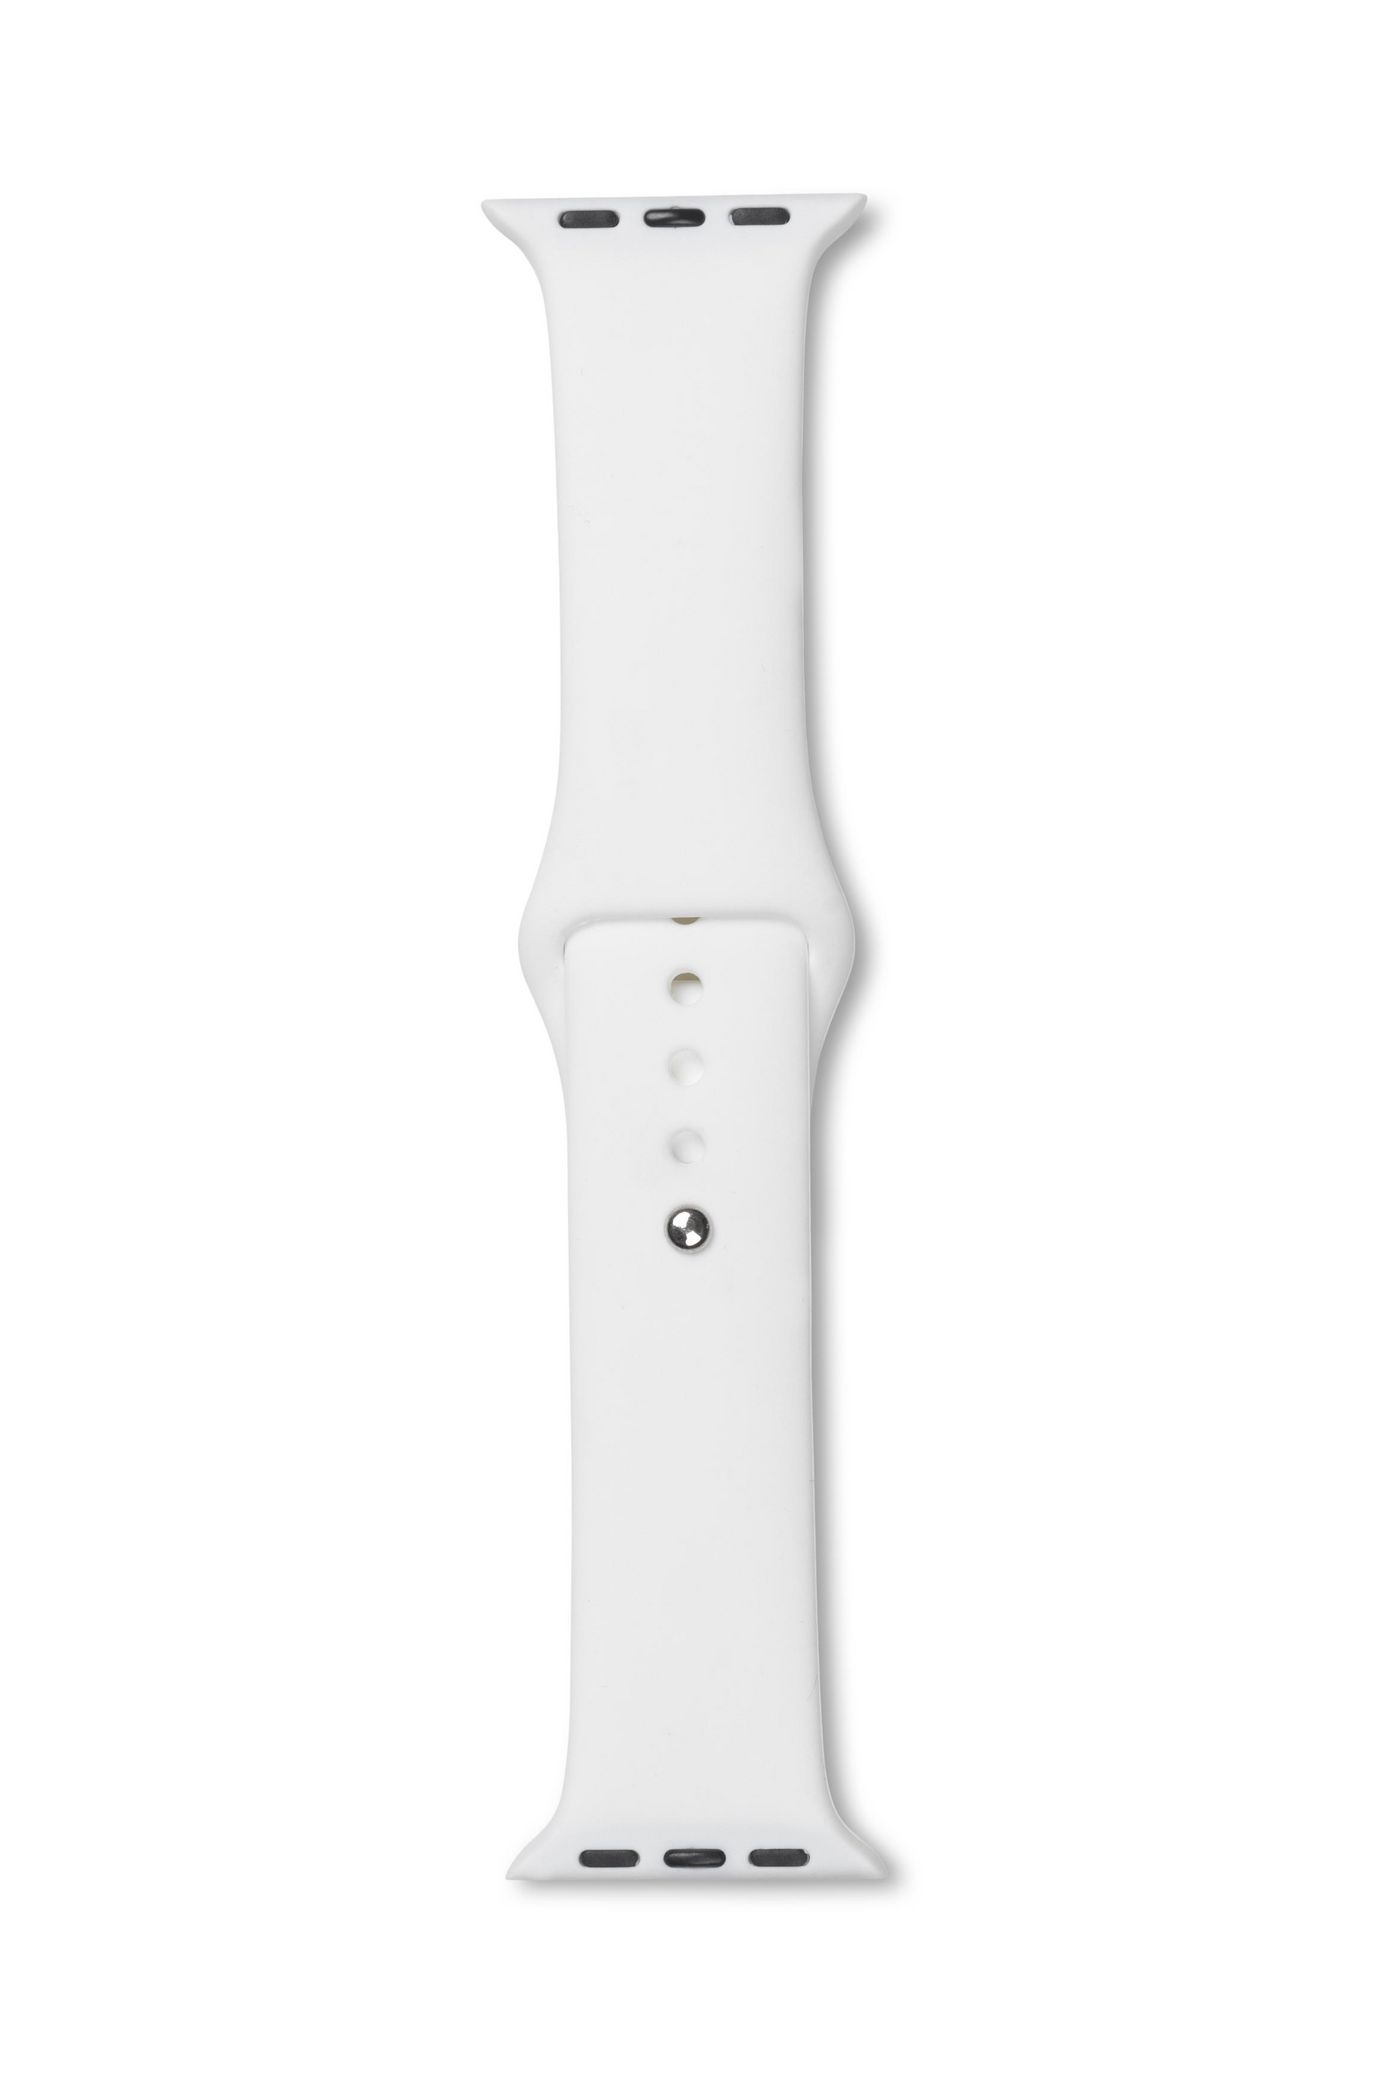 Apple Watch Silicone Strap Color: White. Width 40mm